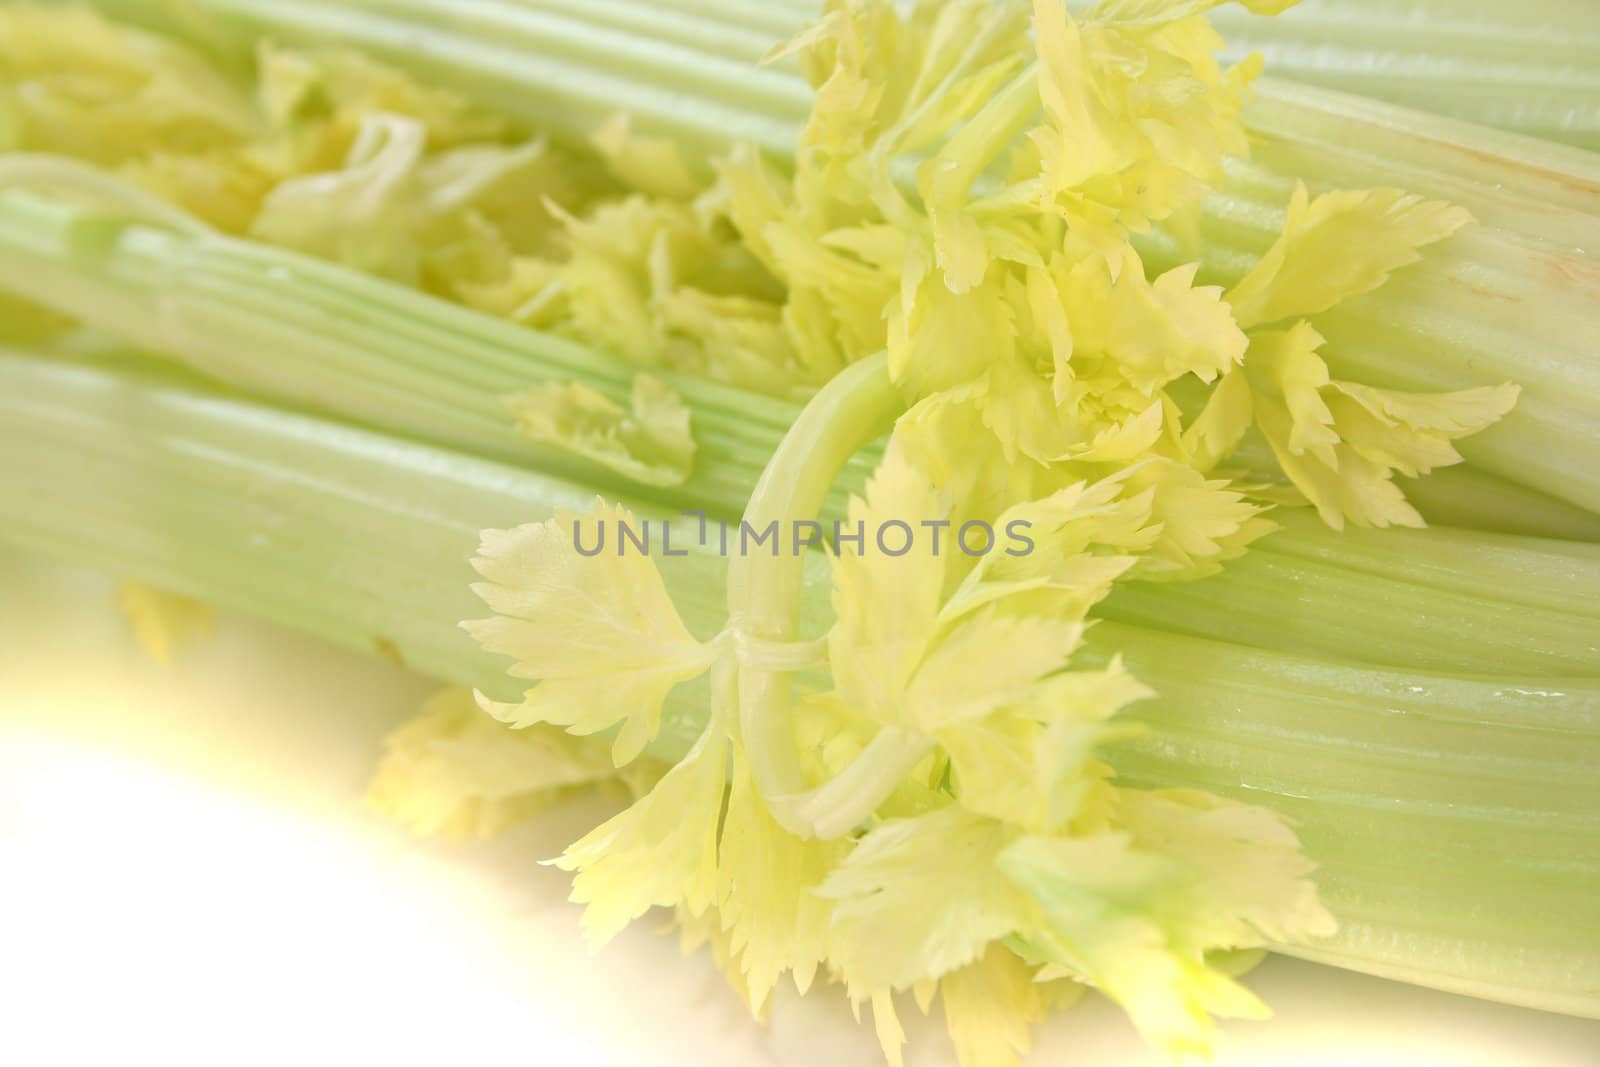 Celery by discovery